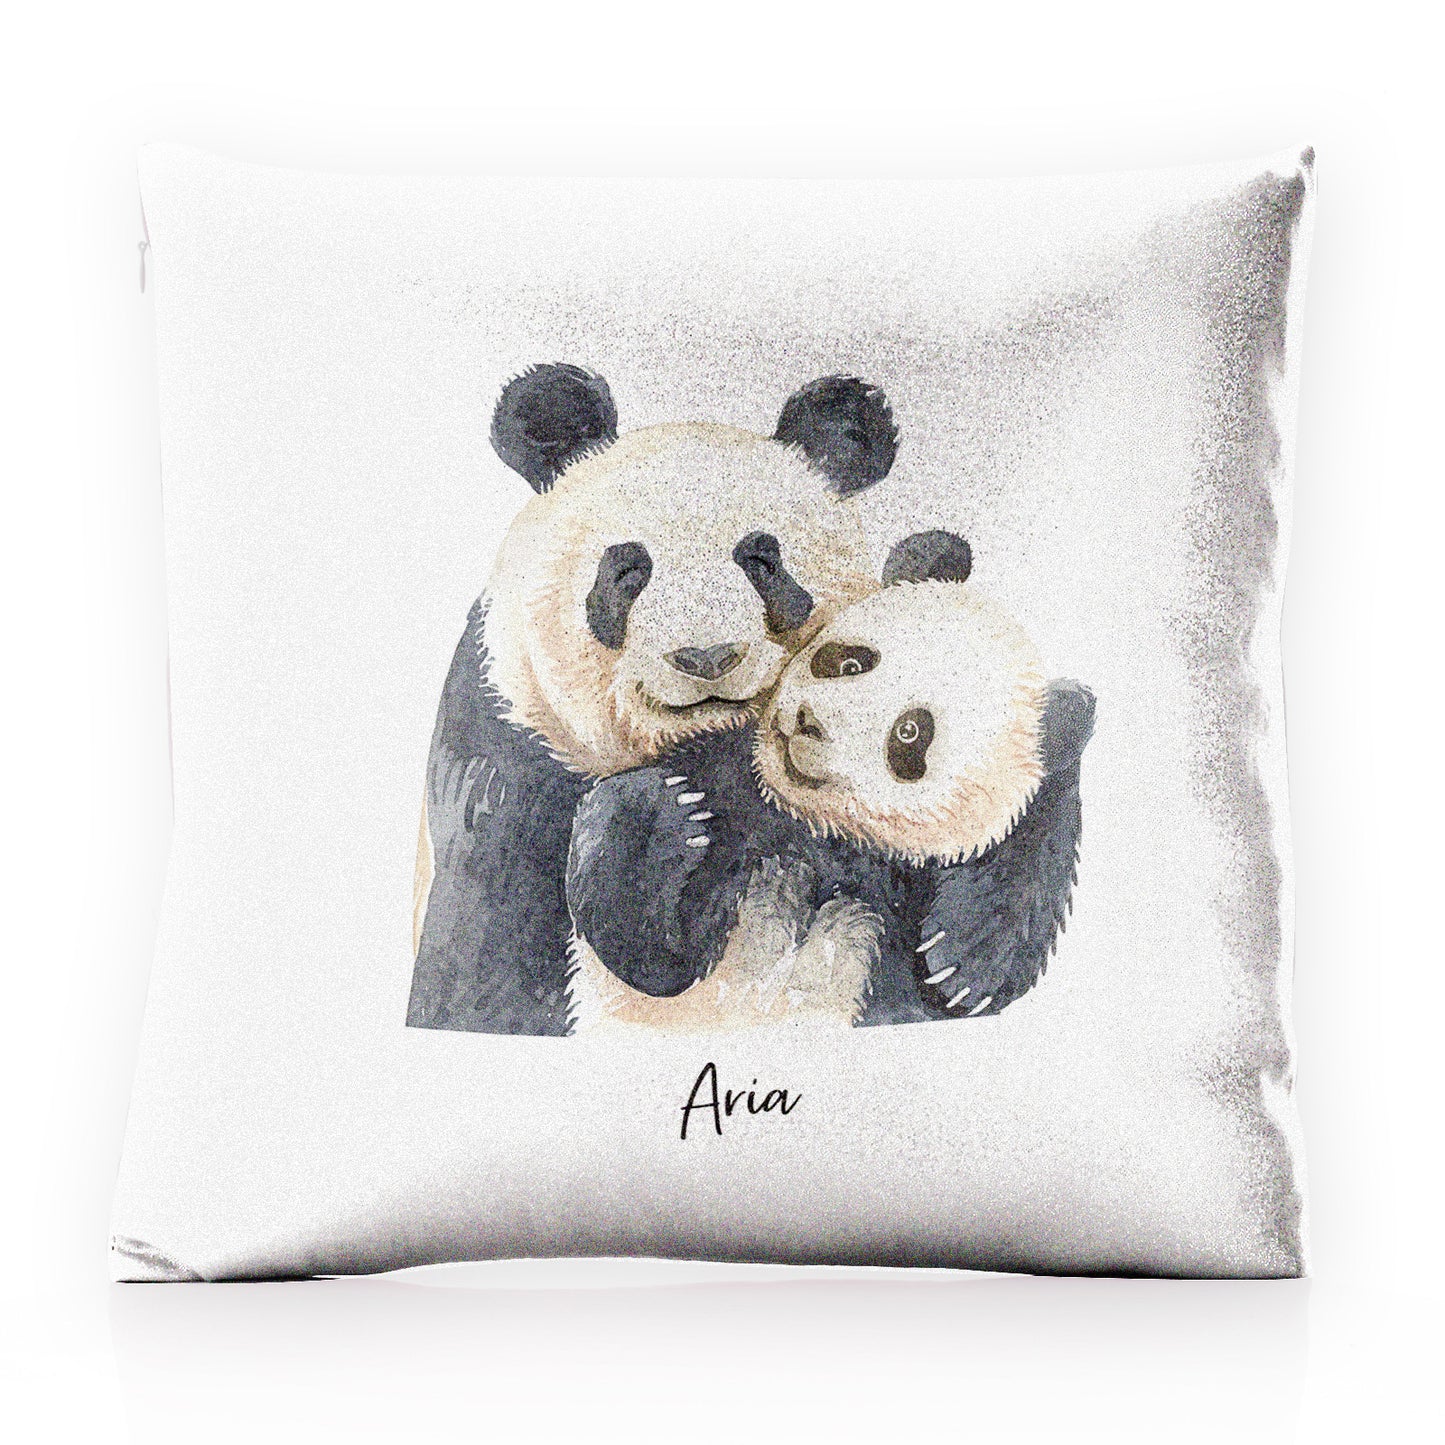 Personalised Glitter Cushion with Welcoming Text and Embracing Mum and Baby Pandas